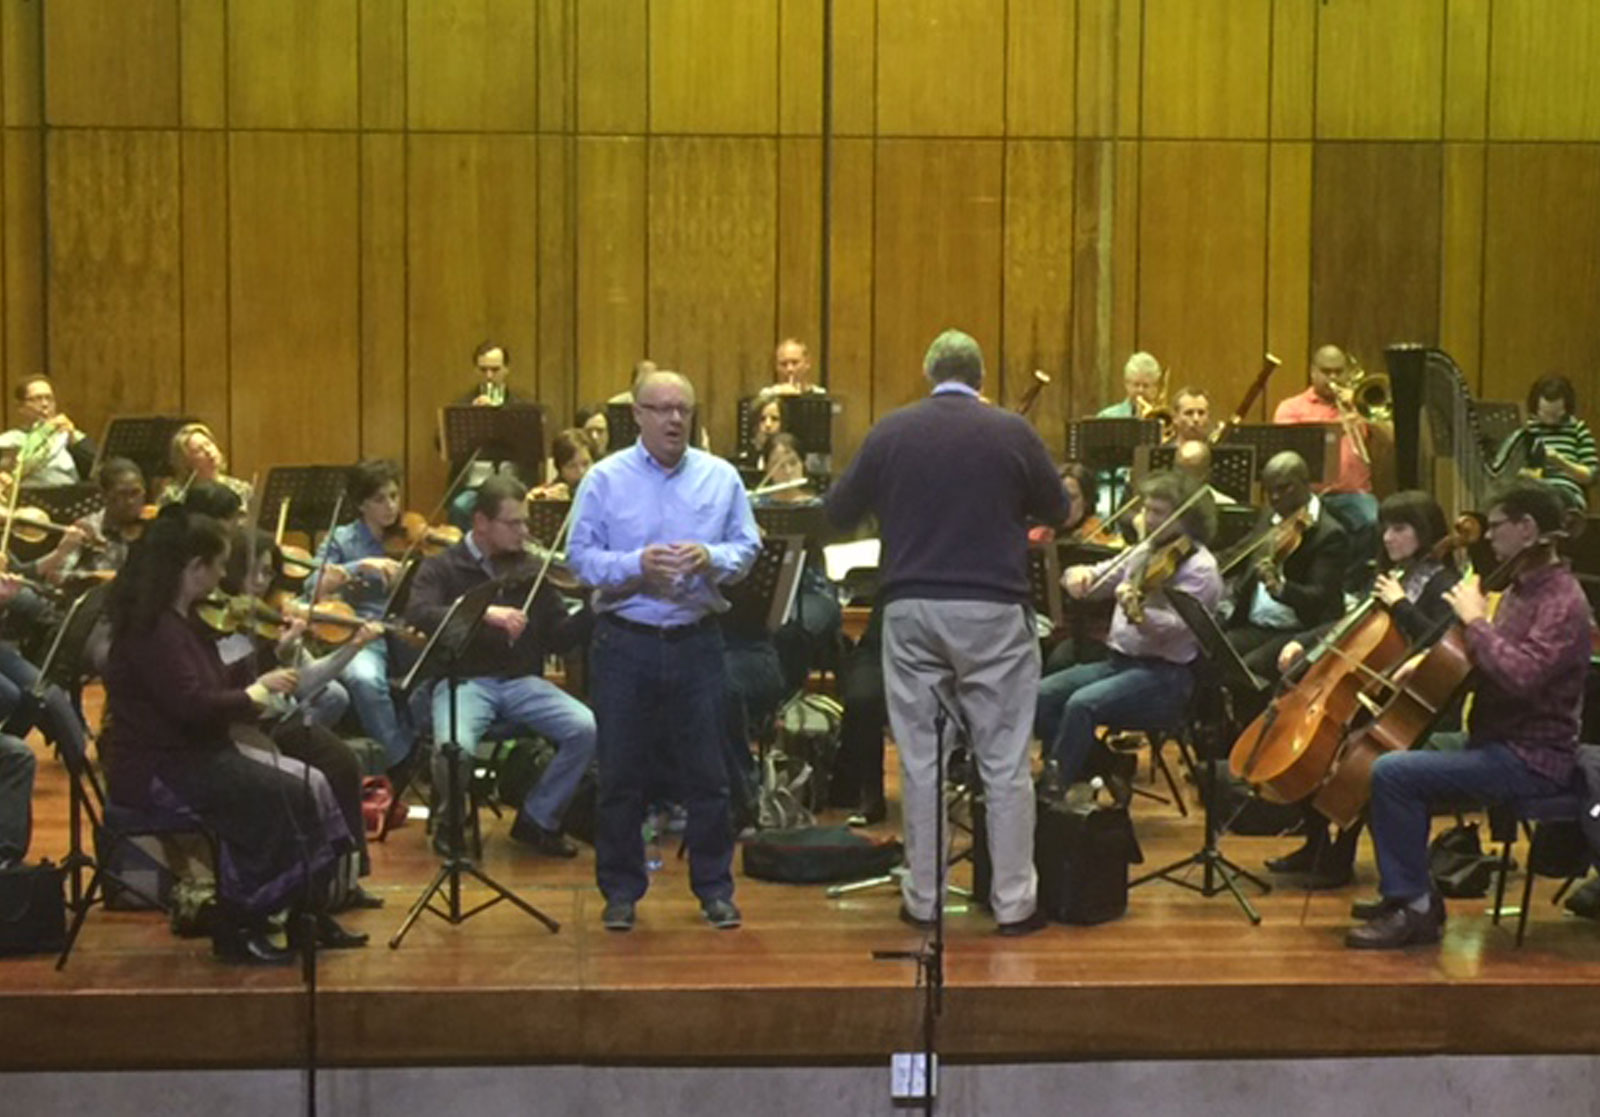 Rehearsing-with-the-Johannesburg-Festival-Orchestra-for-concert-23-August-2017-conducted-by-Maestro-Richard-Cock